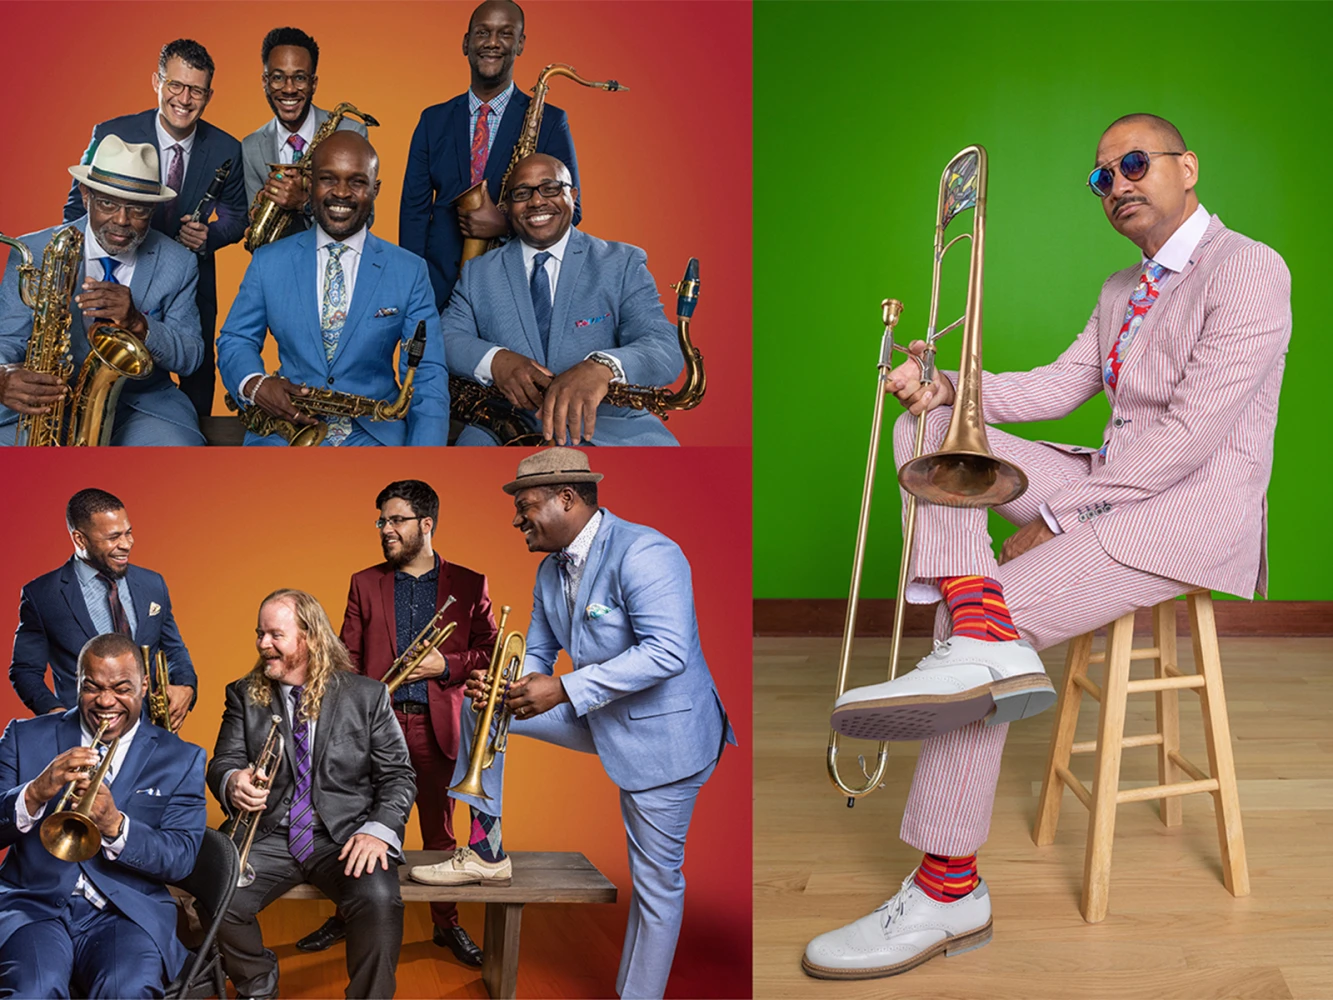 Delfeayo Marsalis and the Uptown Jazz Orchestra: What to expect - 1